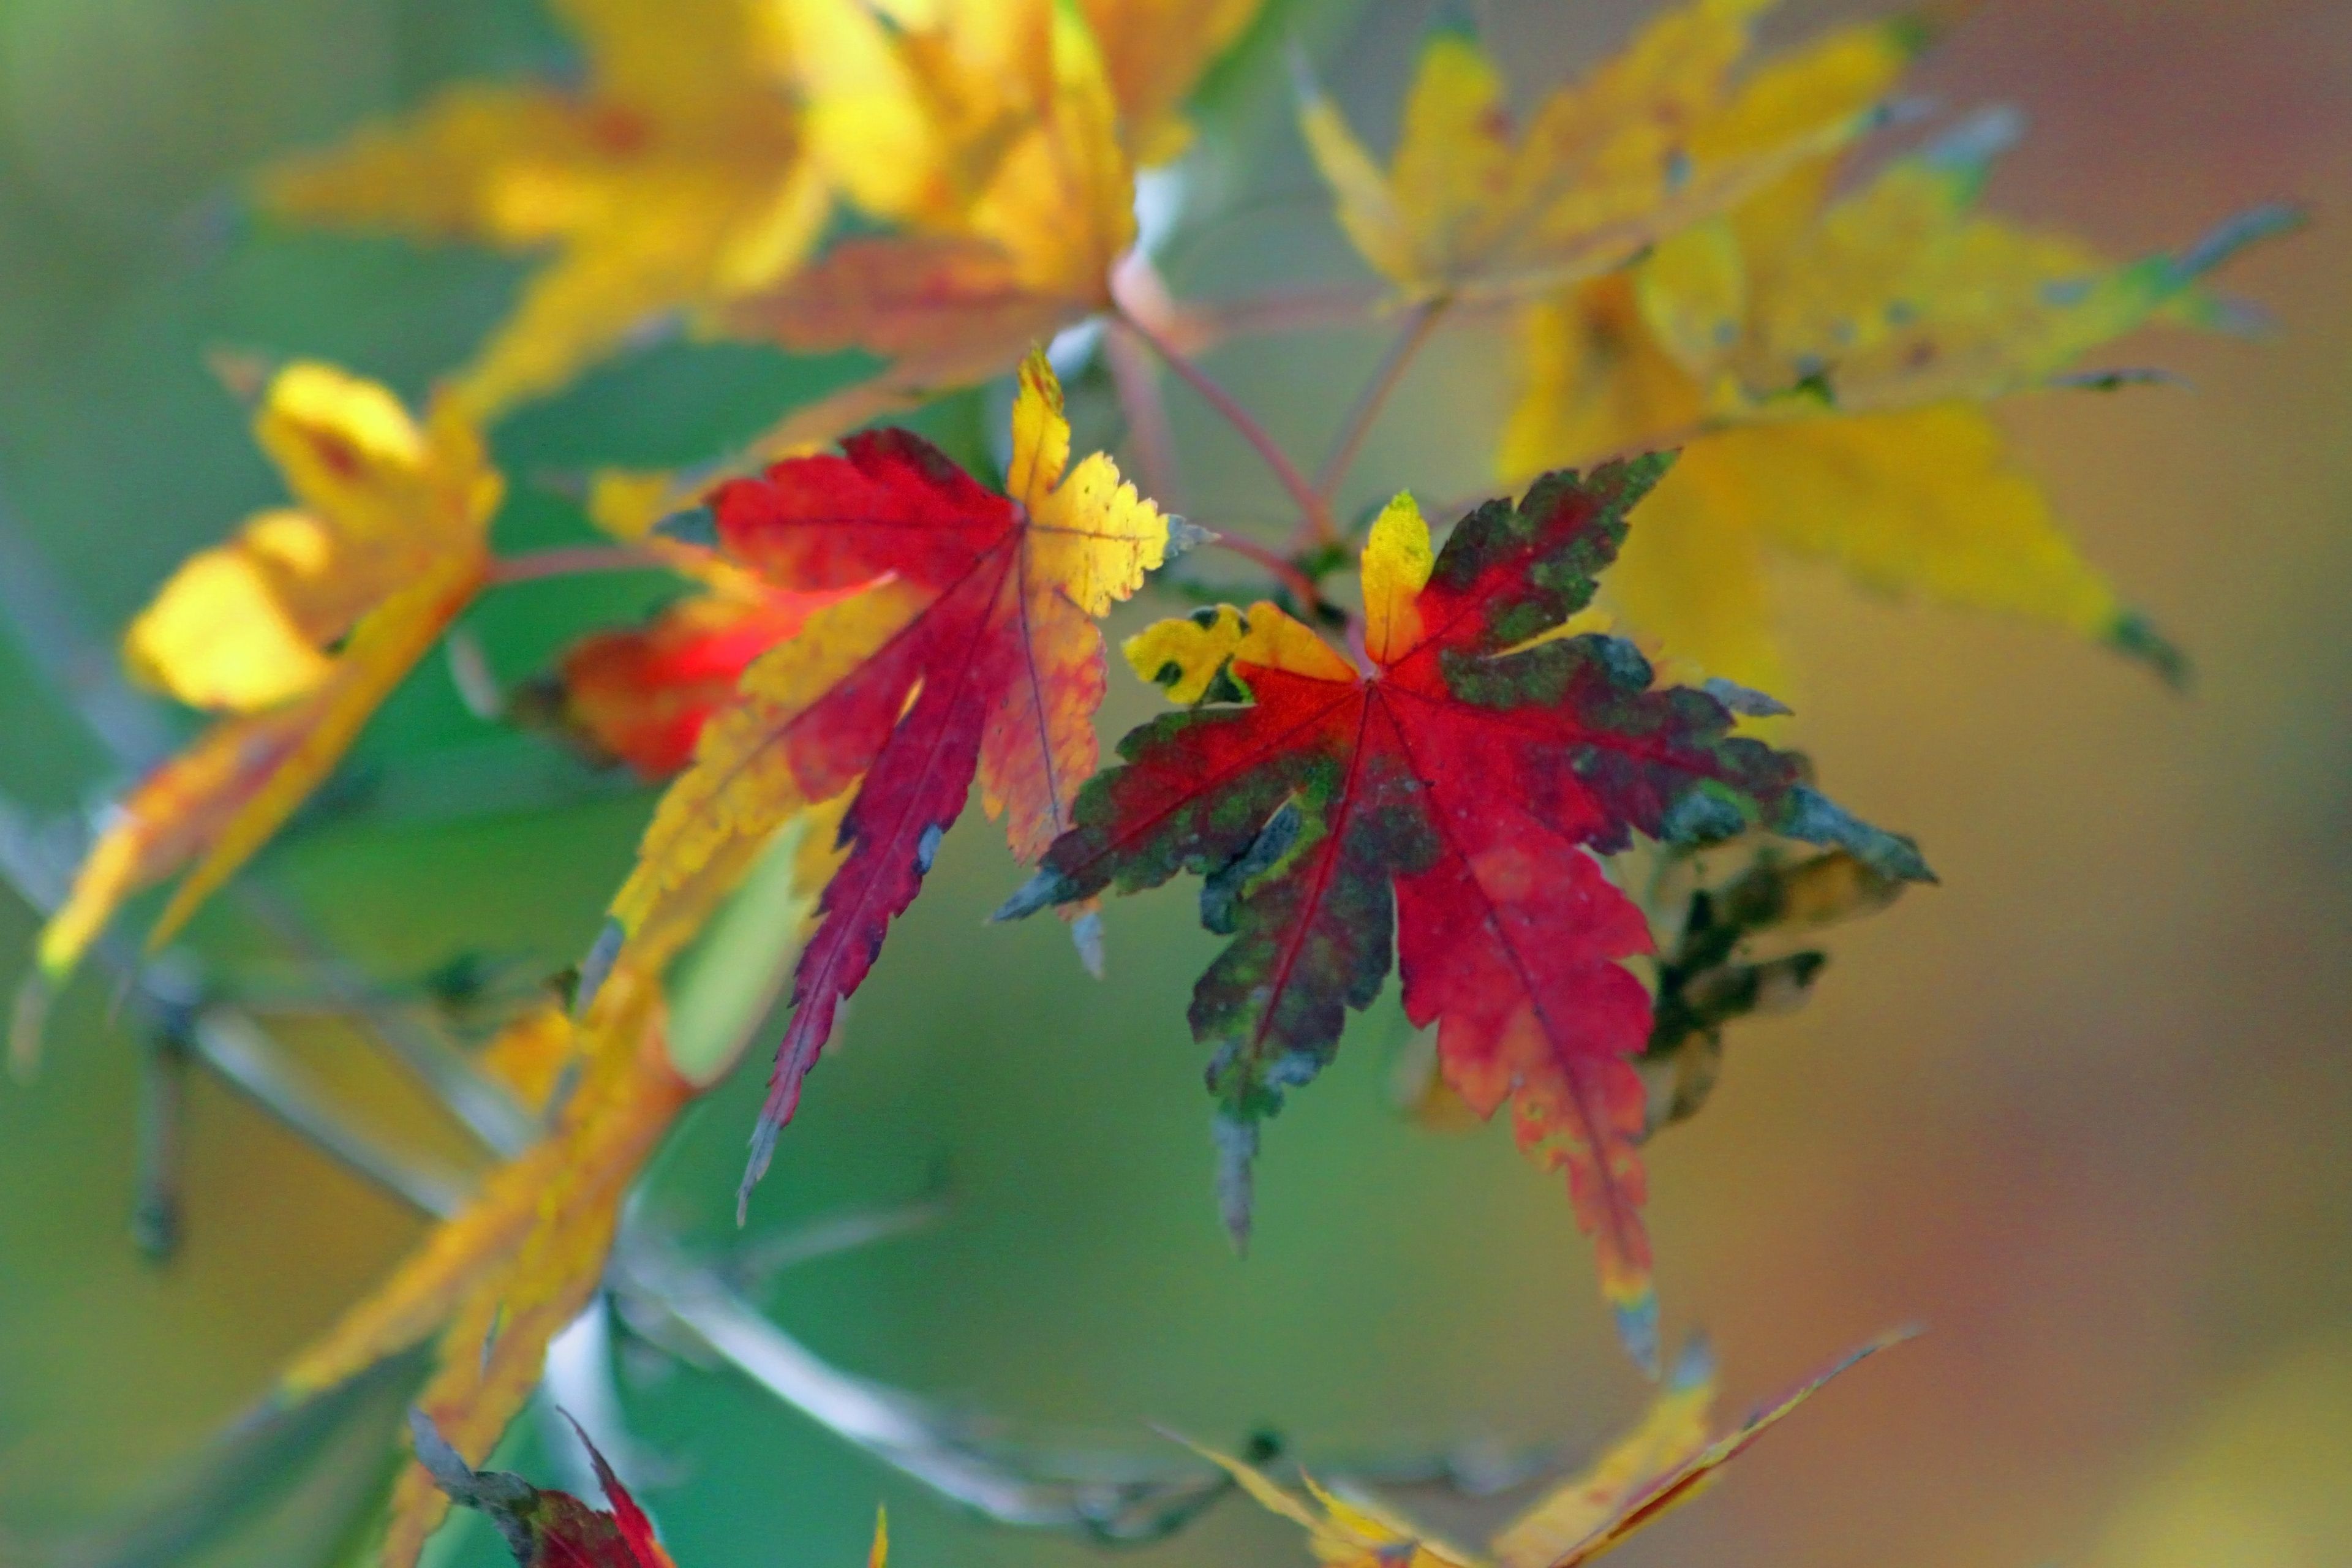 A branch of Japanese maple leaves changing colors in the fall.